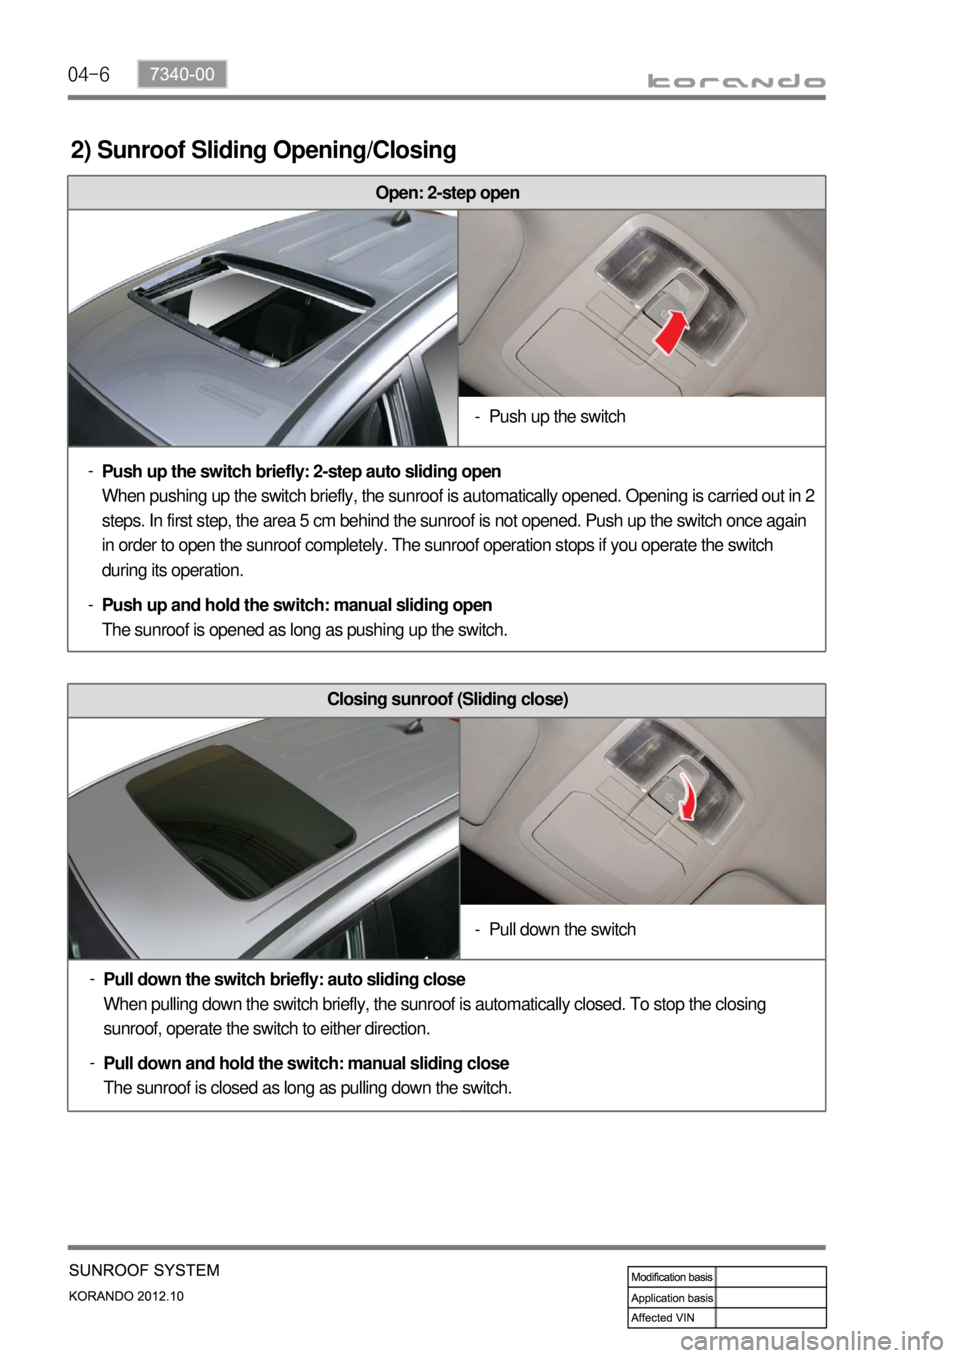 SSANGYONG KORANDO 2012  Service Manual 04-6
2) Sunroof Sliding Opening/Closing
Closing sunroof (Sliding close)
Pull down the switch briefly: auto sliding close
When pulling down the switch briefly, the sunroof is automatically closed. To s